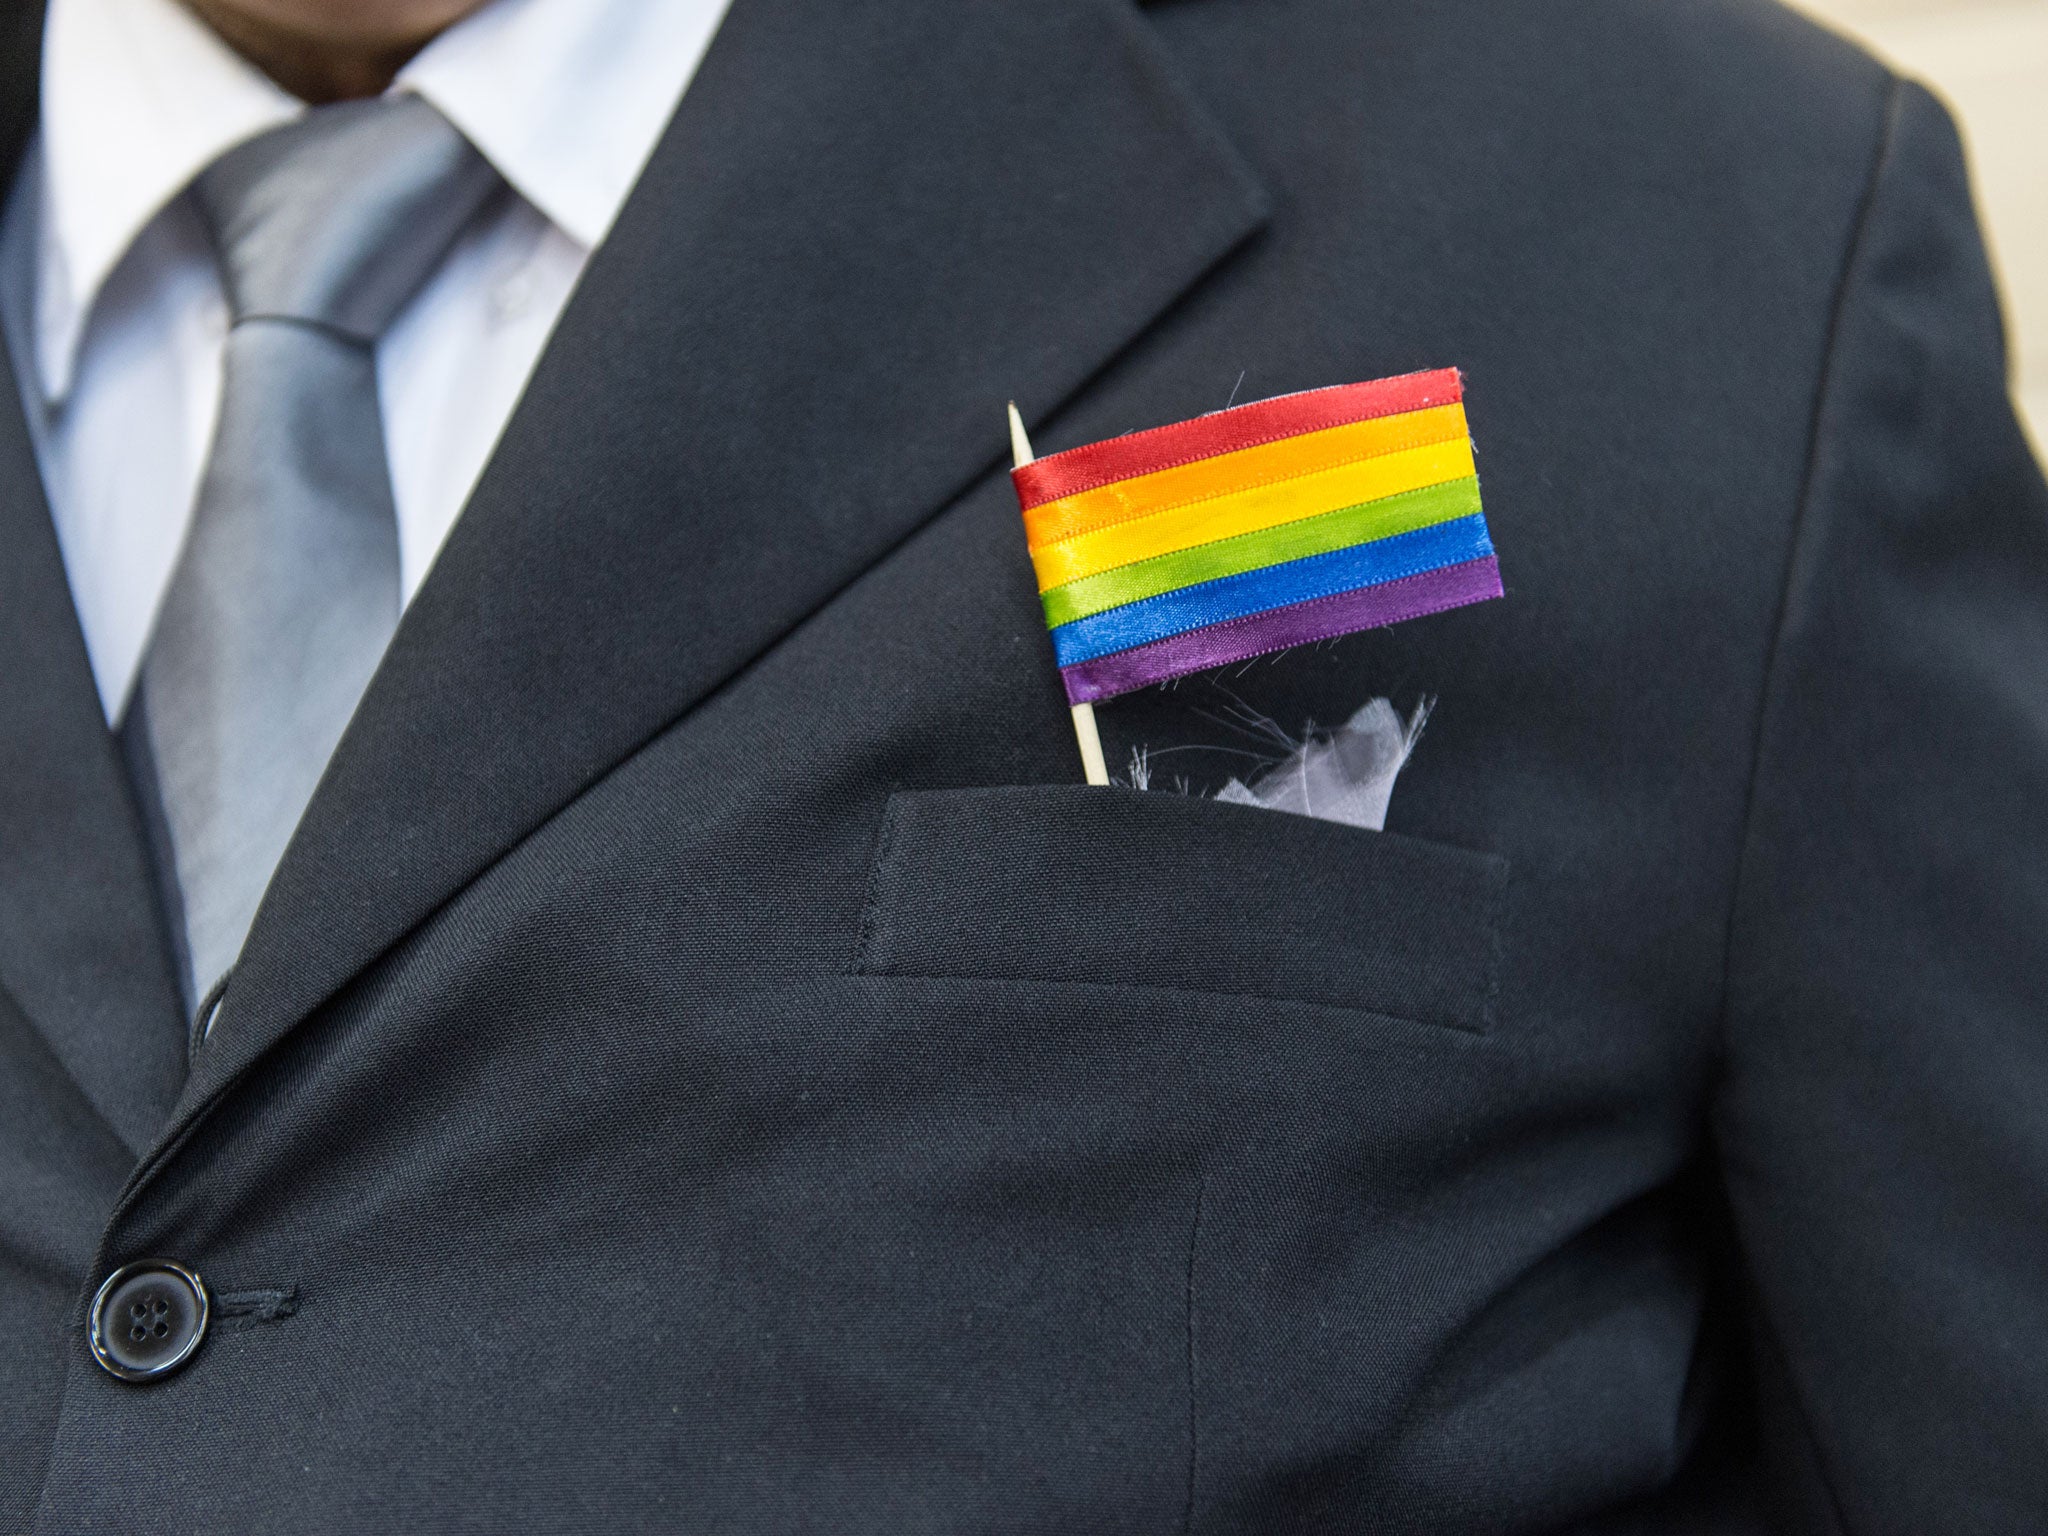 The father of a bride wears a rainbow flag during the wedding ceremony at the Court of Justice of the State of Rio de Janeiro in Rio de Janeiro, Brazil, on December 8, 2013. 130 gay couples are getting married in the first massive wedding ceremony since t